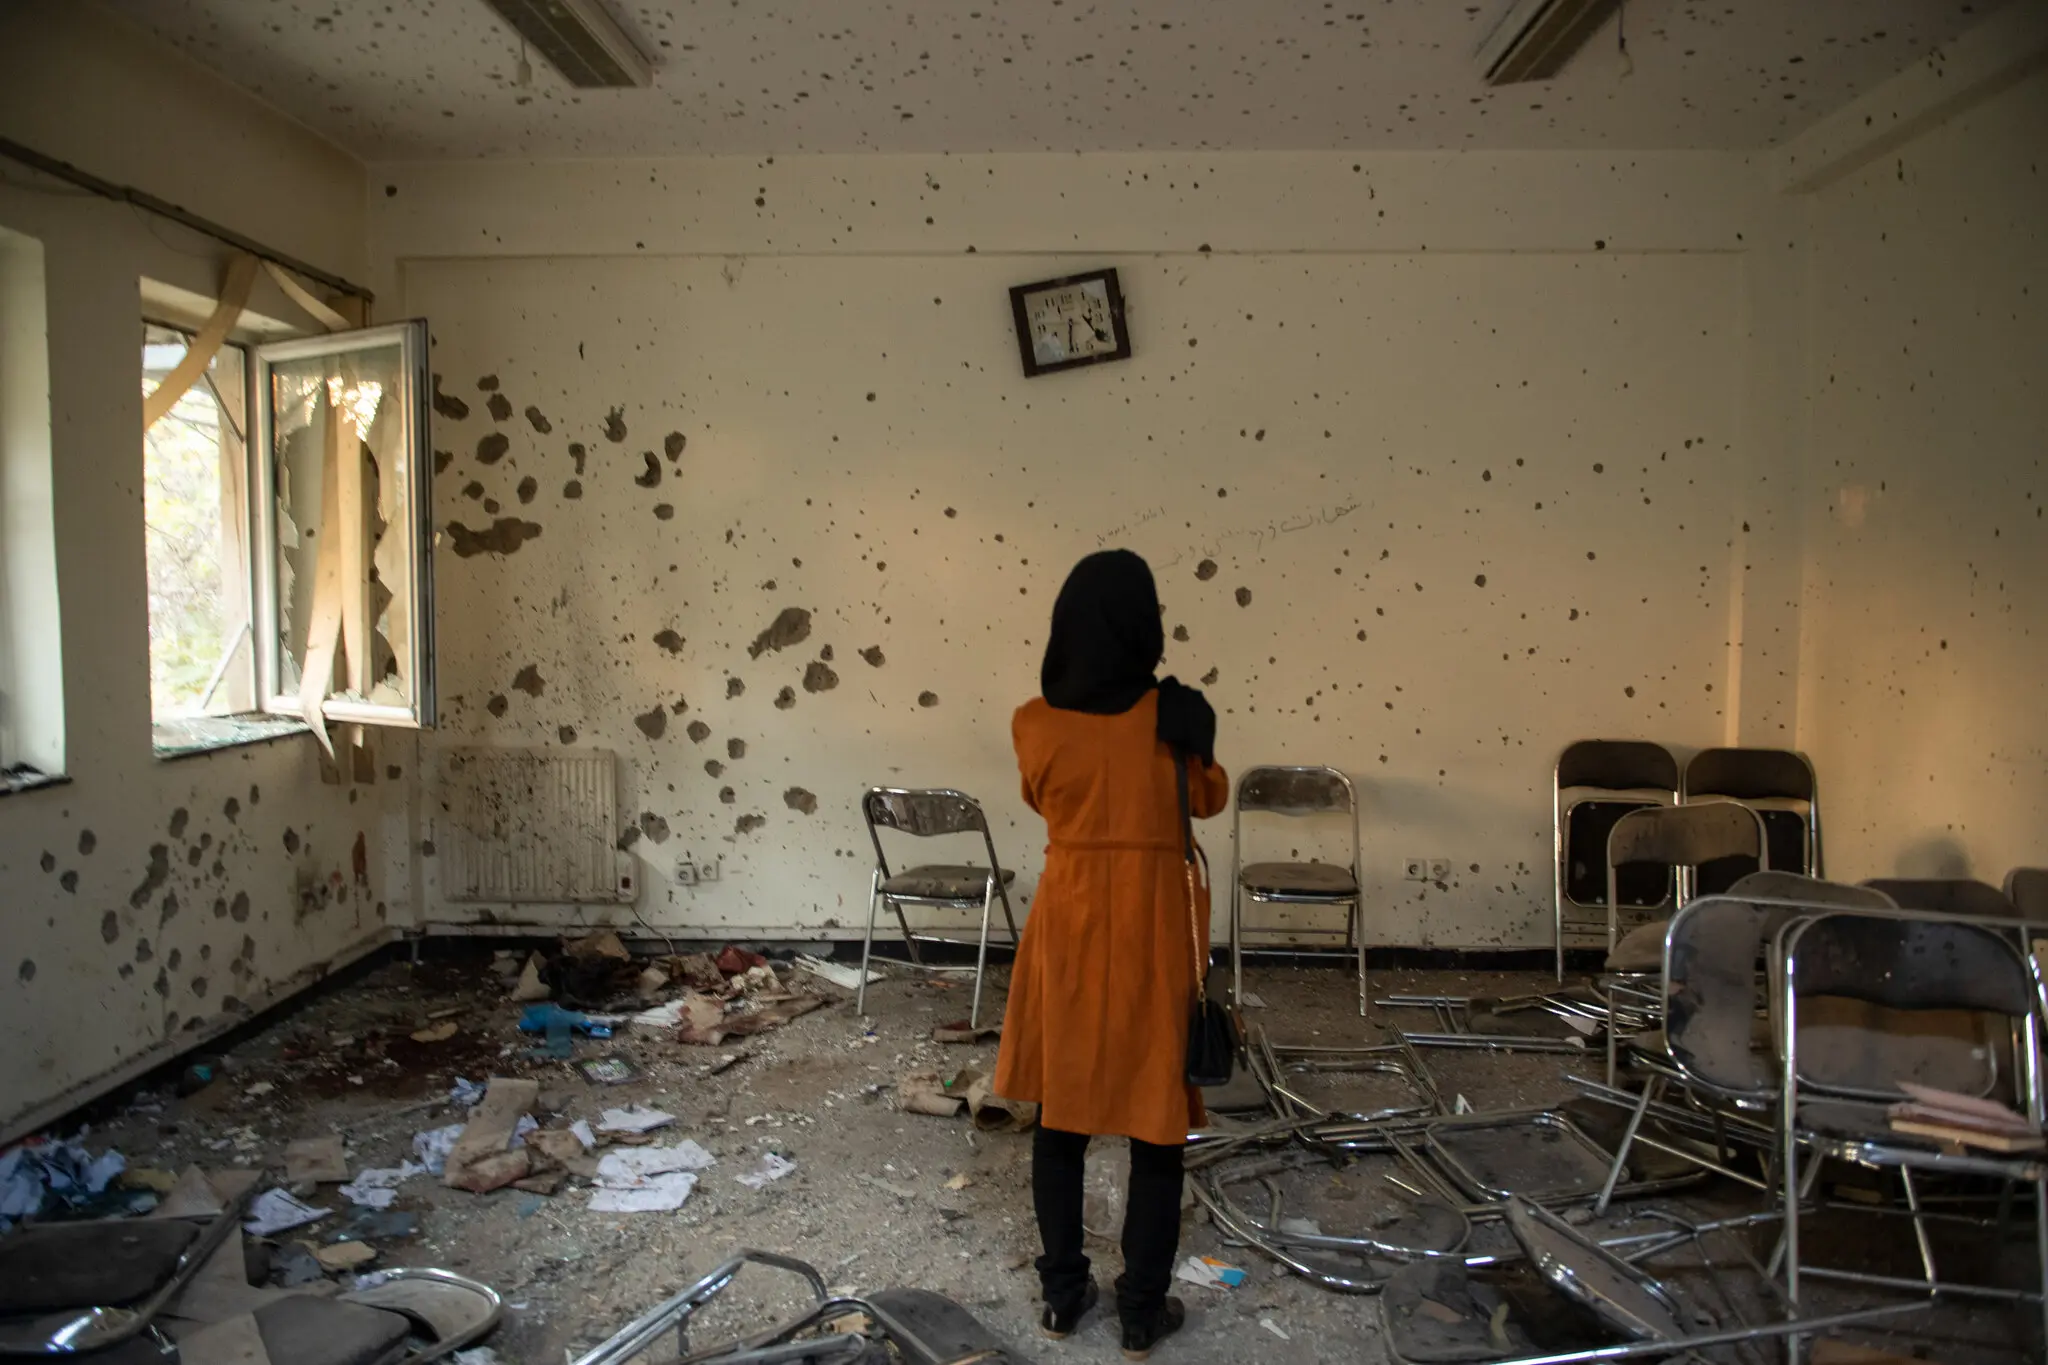 A student looking at the ruins of a classroom at Kabul University, after an ISIS attack that killed 22 students in November 2020. Source: NY Times